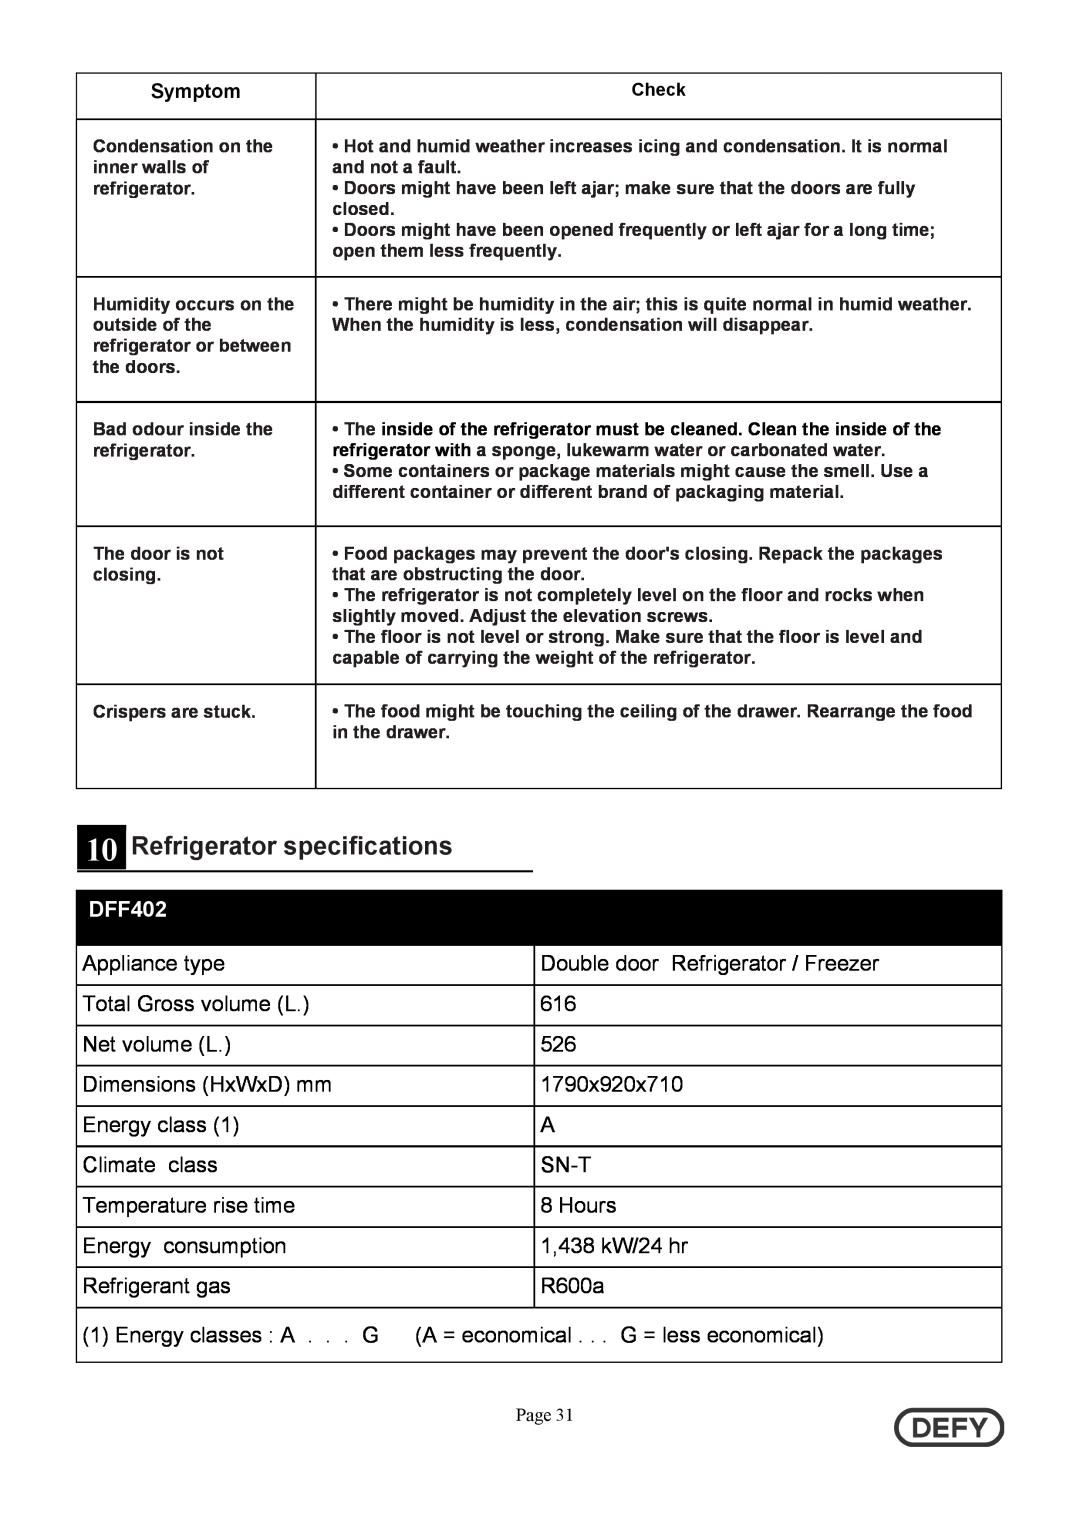 Defy Appliances 5718140000/AA instruction manual Refrigerator specifications, DFF402 